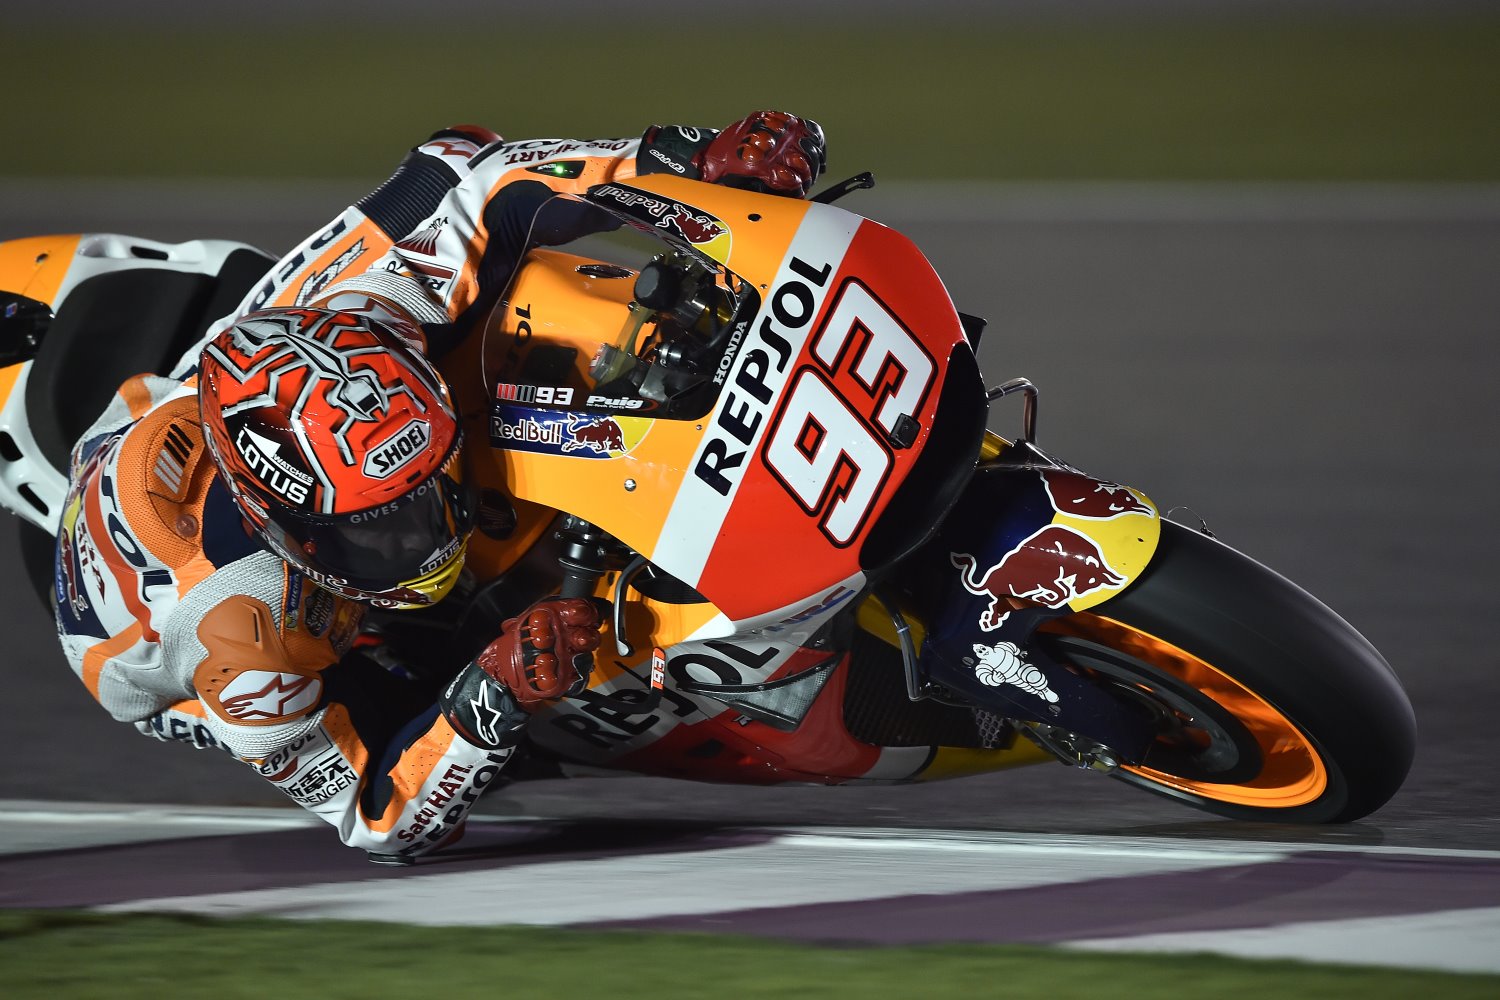 Marquez did all he could to finish 3rd